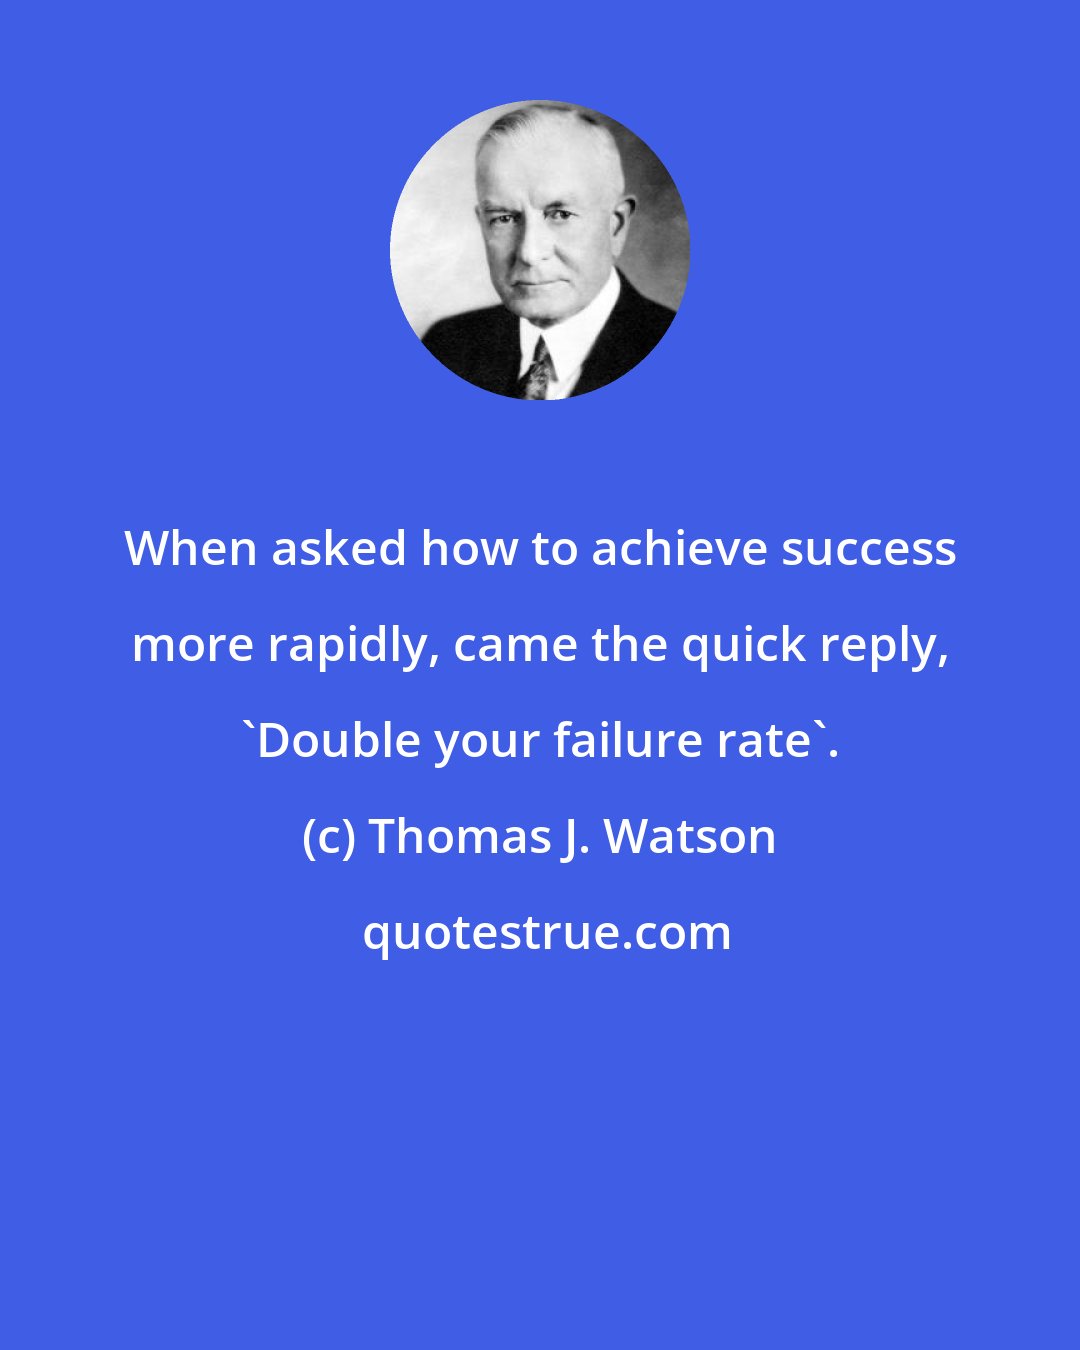 Thomas J. Watson: When asked how to achieve success more rapidly, came the quick reply, 'Double your failure rate'.